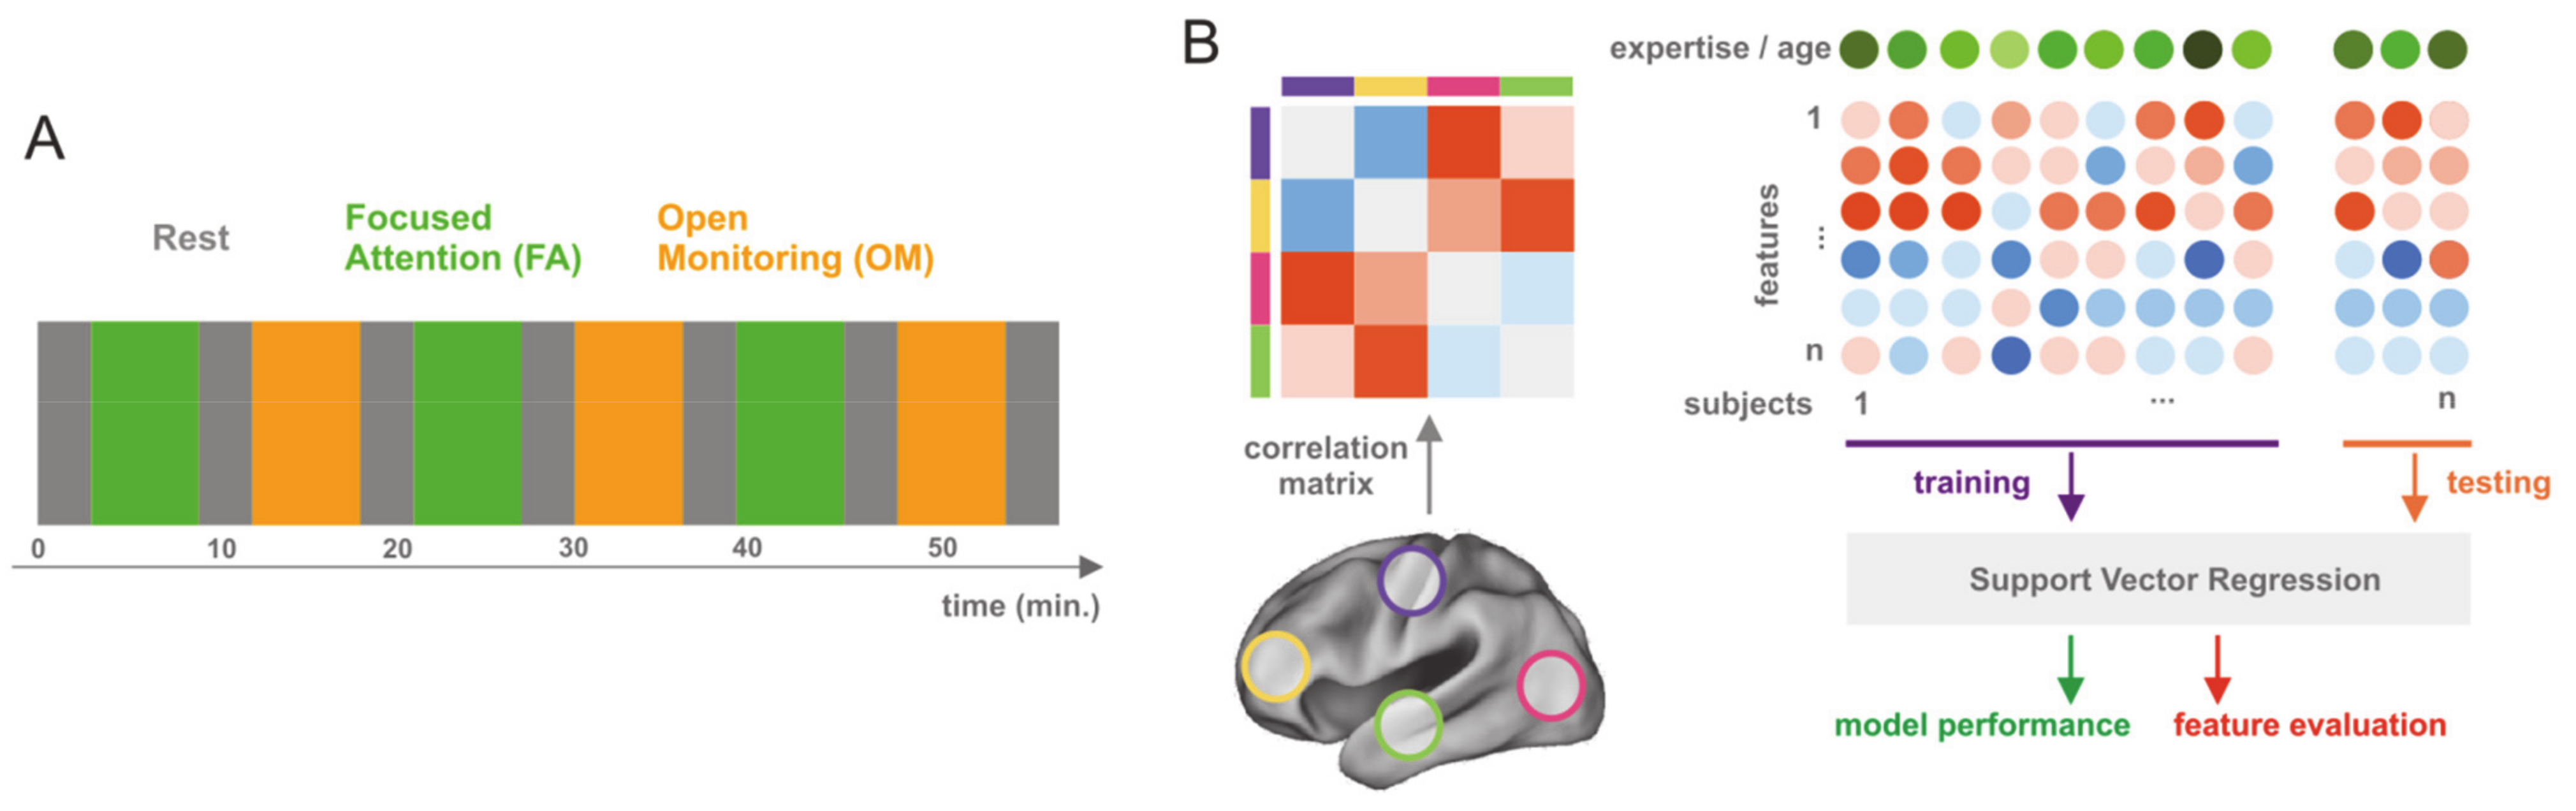 Brain Sciences | Free Full-Text | Neuroplasticity within and between  Functional Brain Networks in Mental Training Based on Long-Term Meditation